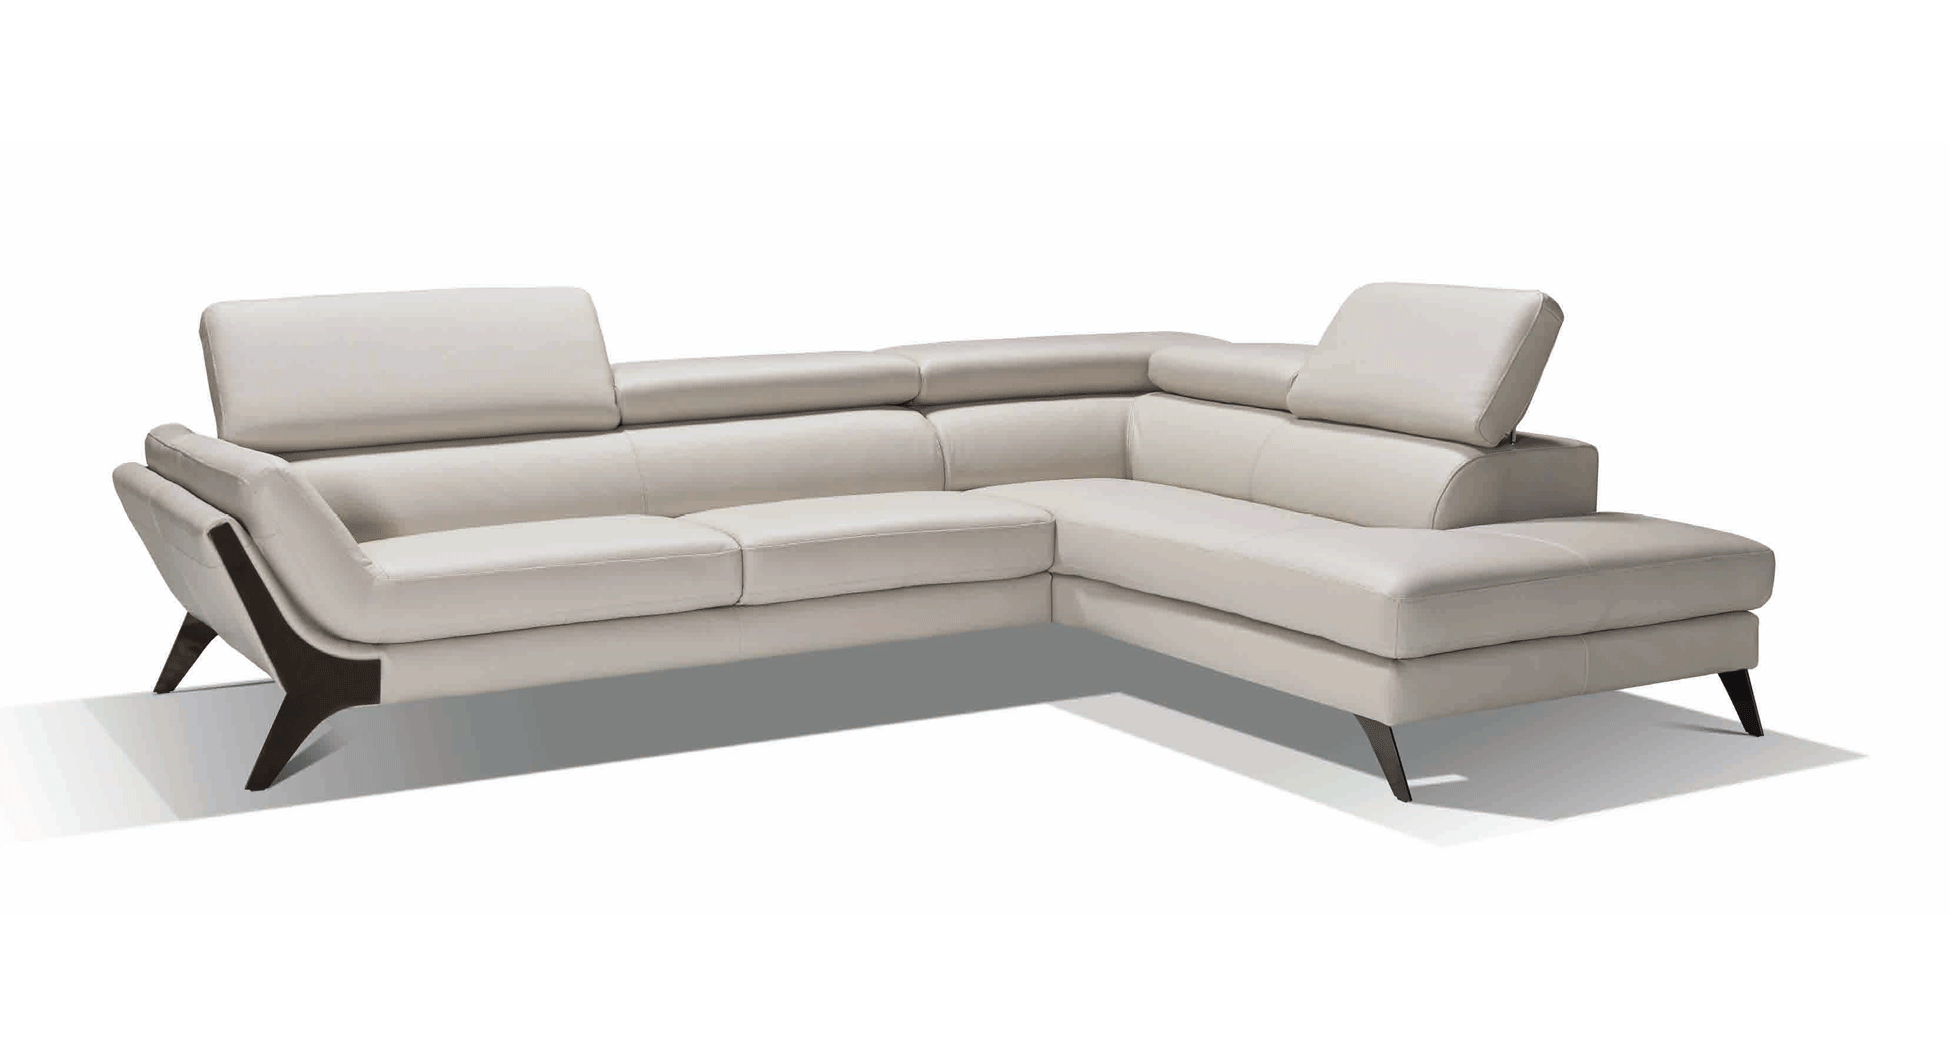 Living Room Furniture Sleepers Sofas Loveseats and Chairs Moncalieri Living room